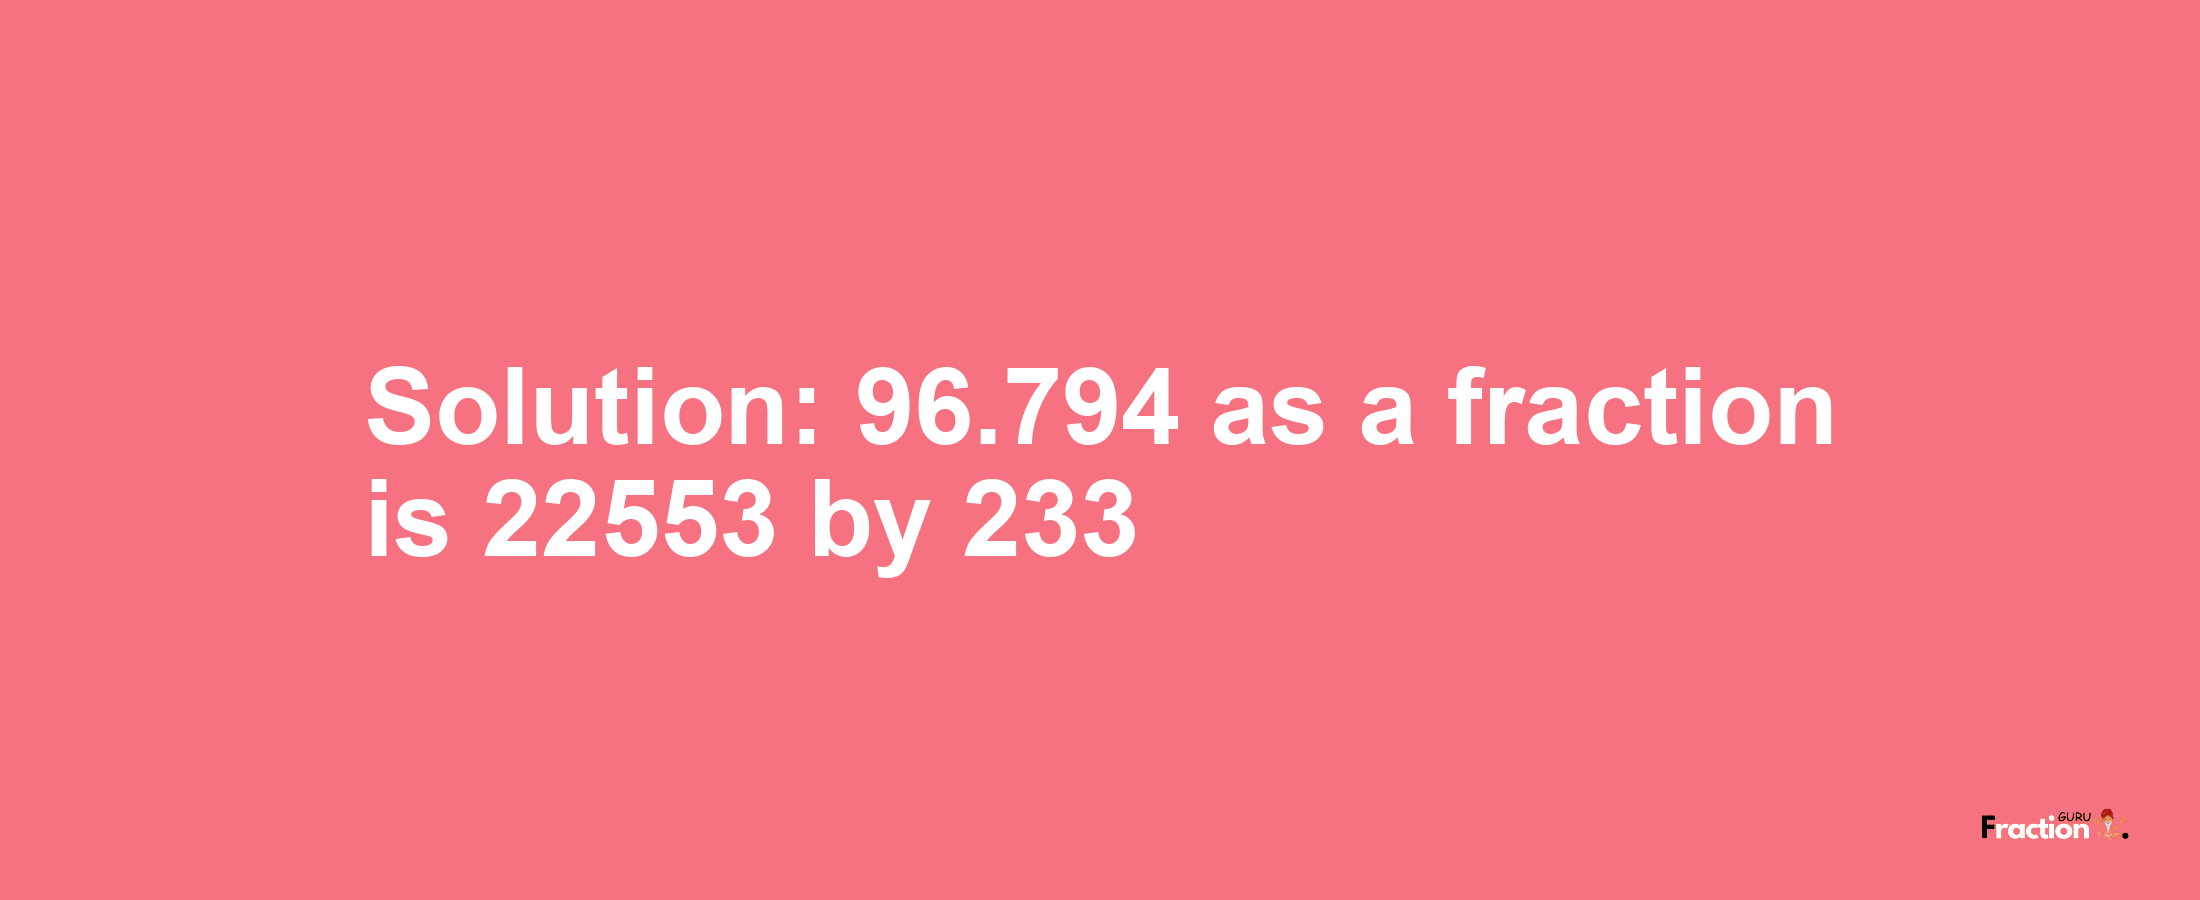 Solution:96.794 as a fraction is 22553/233